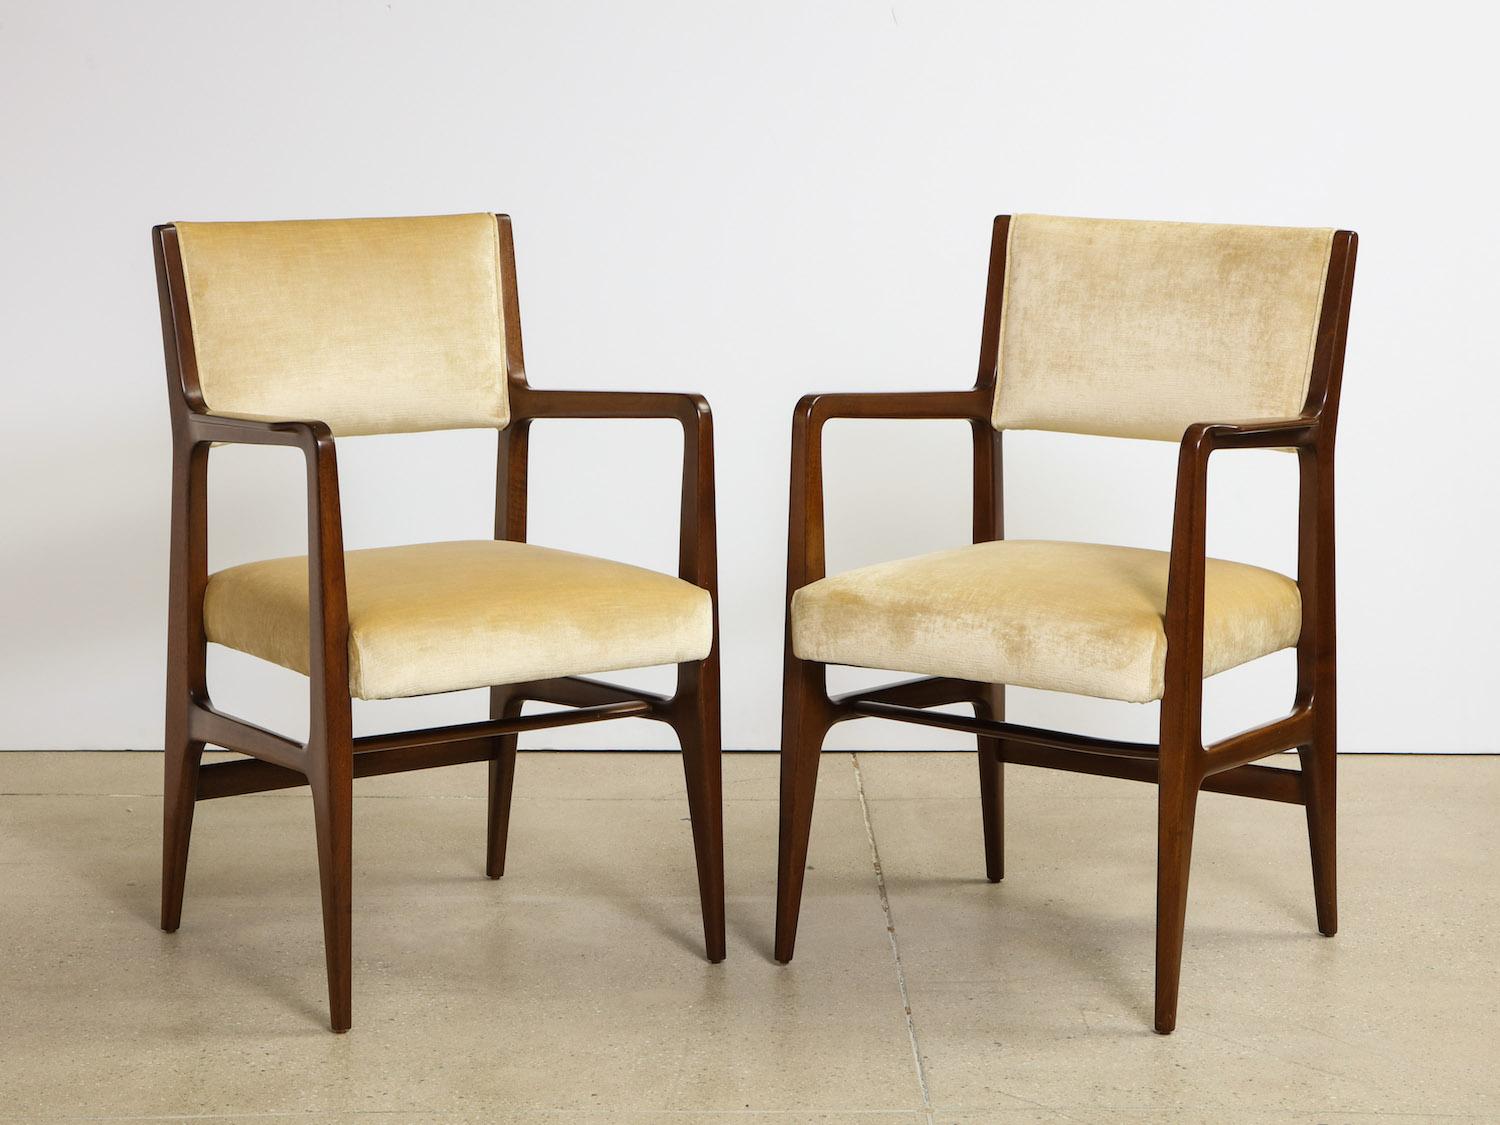 Rare pair of armchairs by Gio Ponti for M. Singer & Sons. Mahogany frames with recently upholstered seat & back. Iconic Ponti forms in excellent condition. 2nd matching pair available.